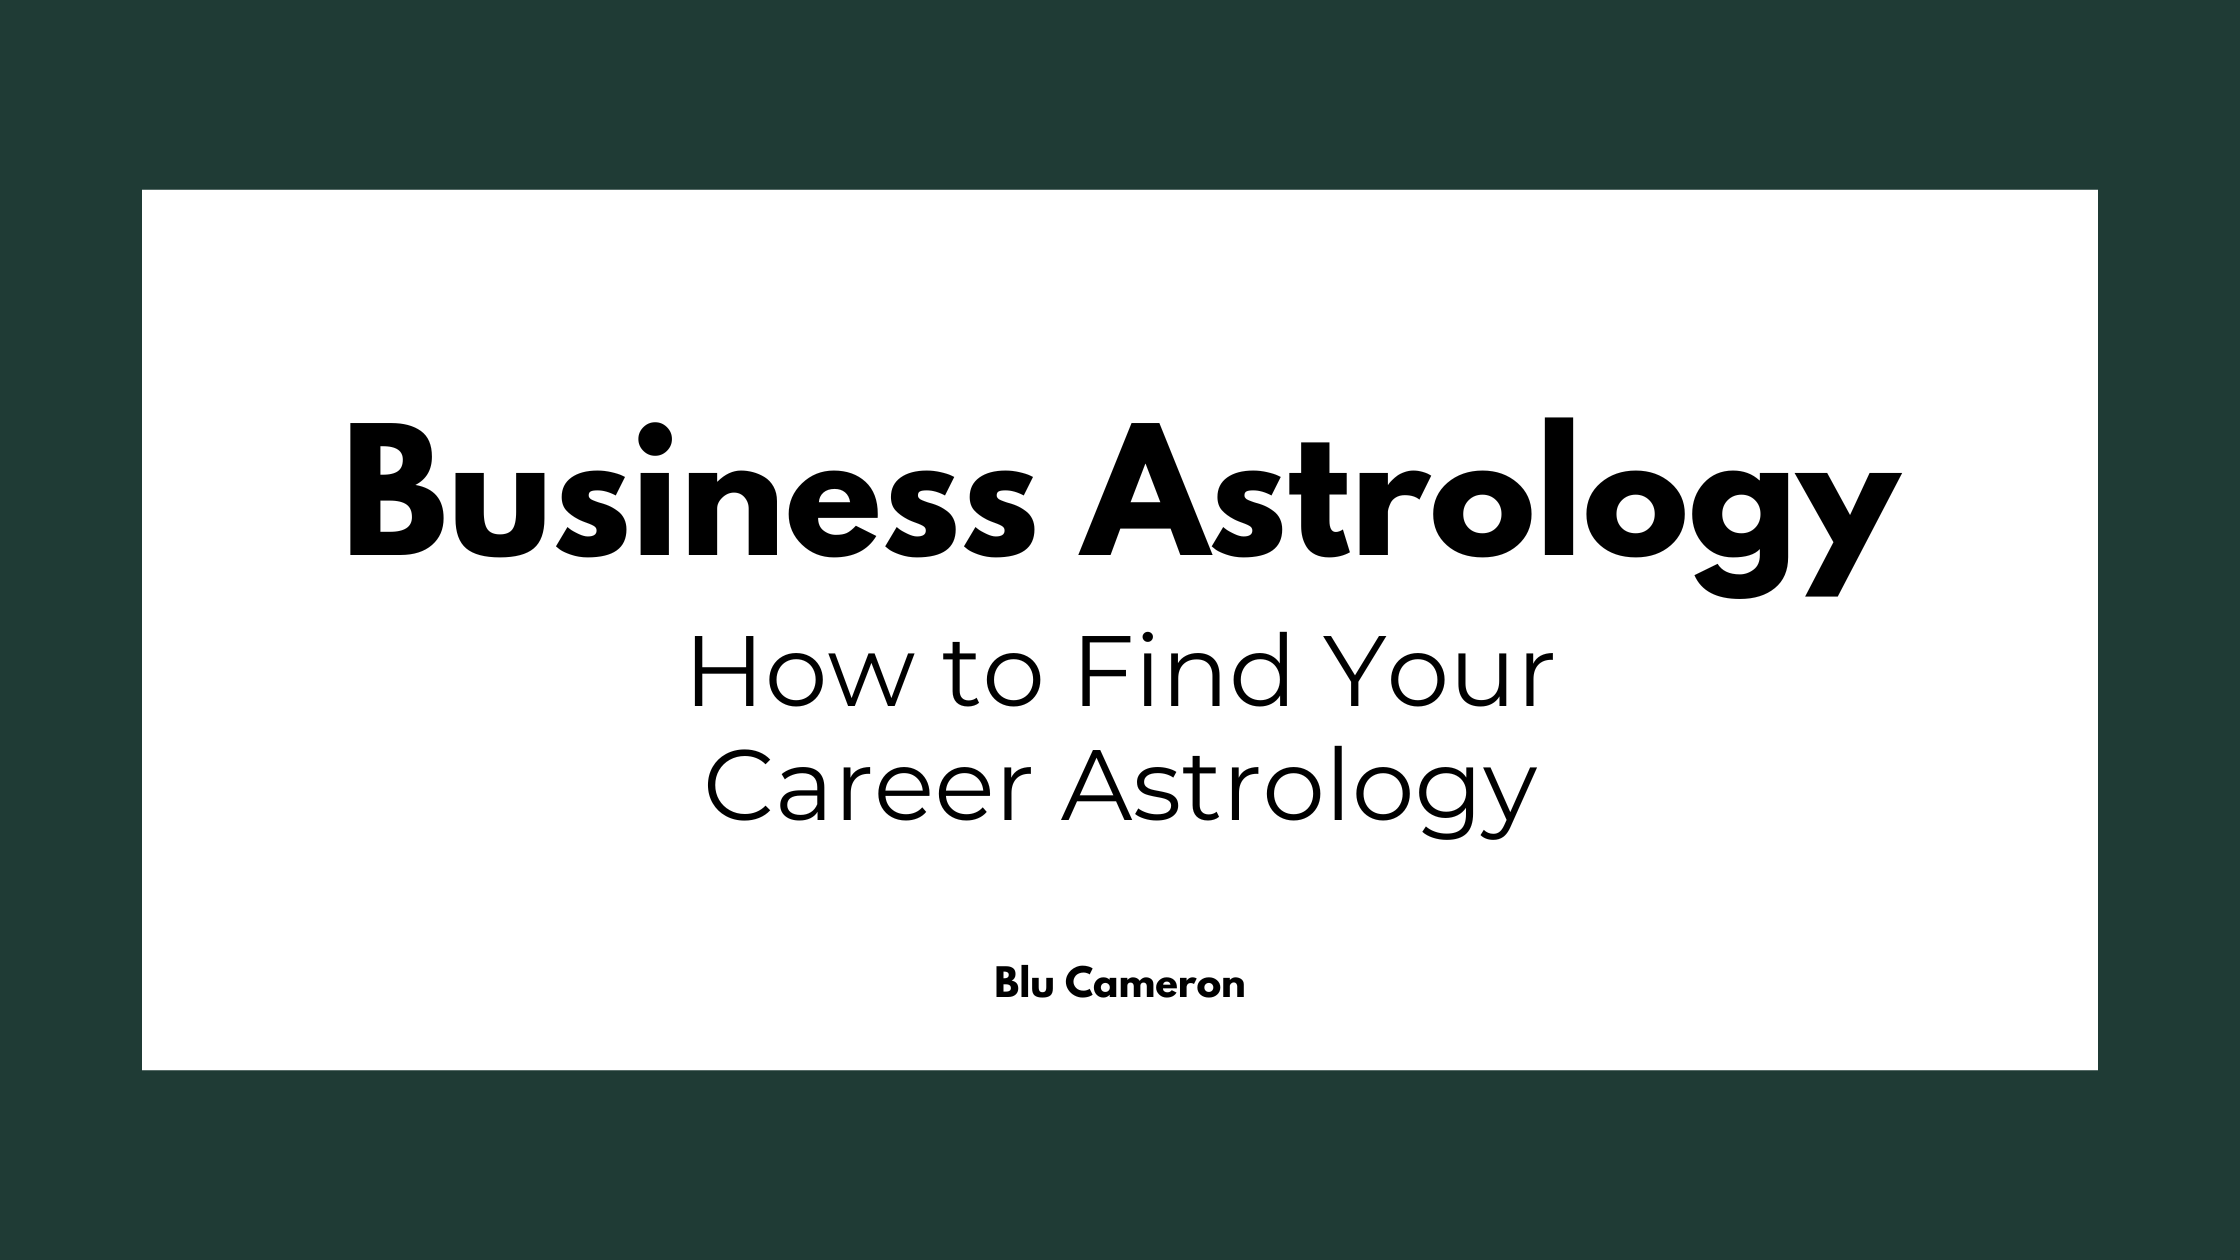 Black text against a white and dark green background reads: "How to Find Your Career Astrology"